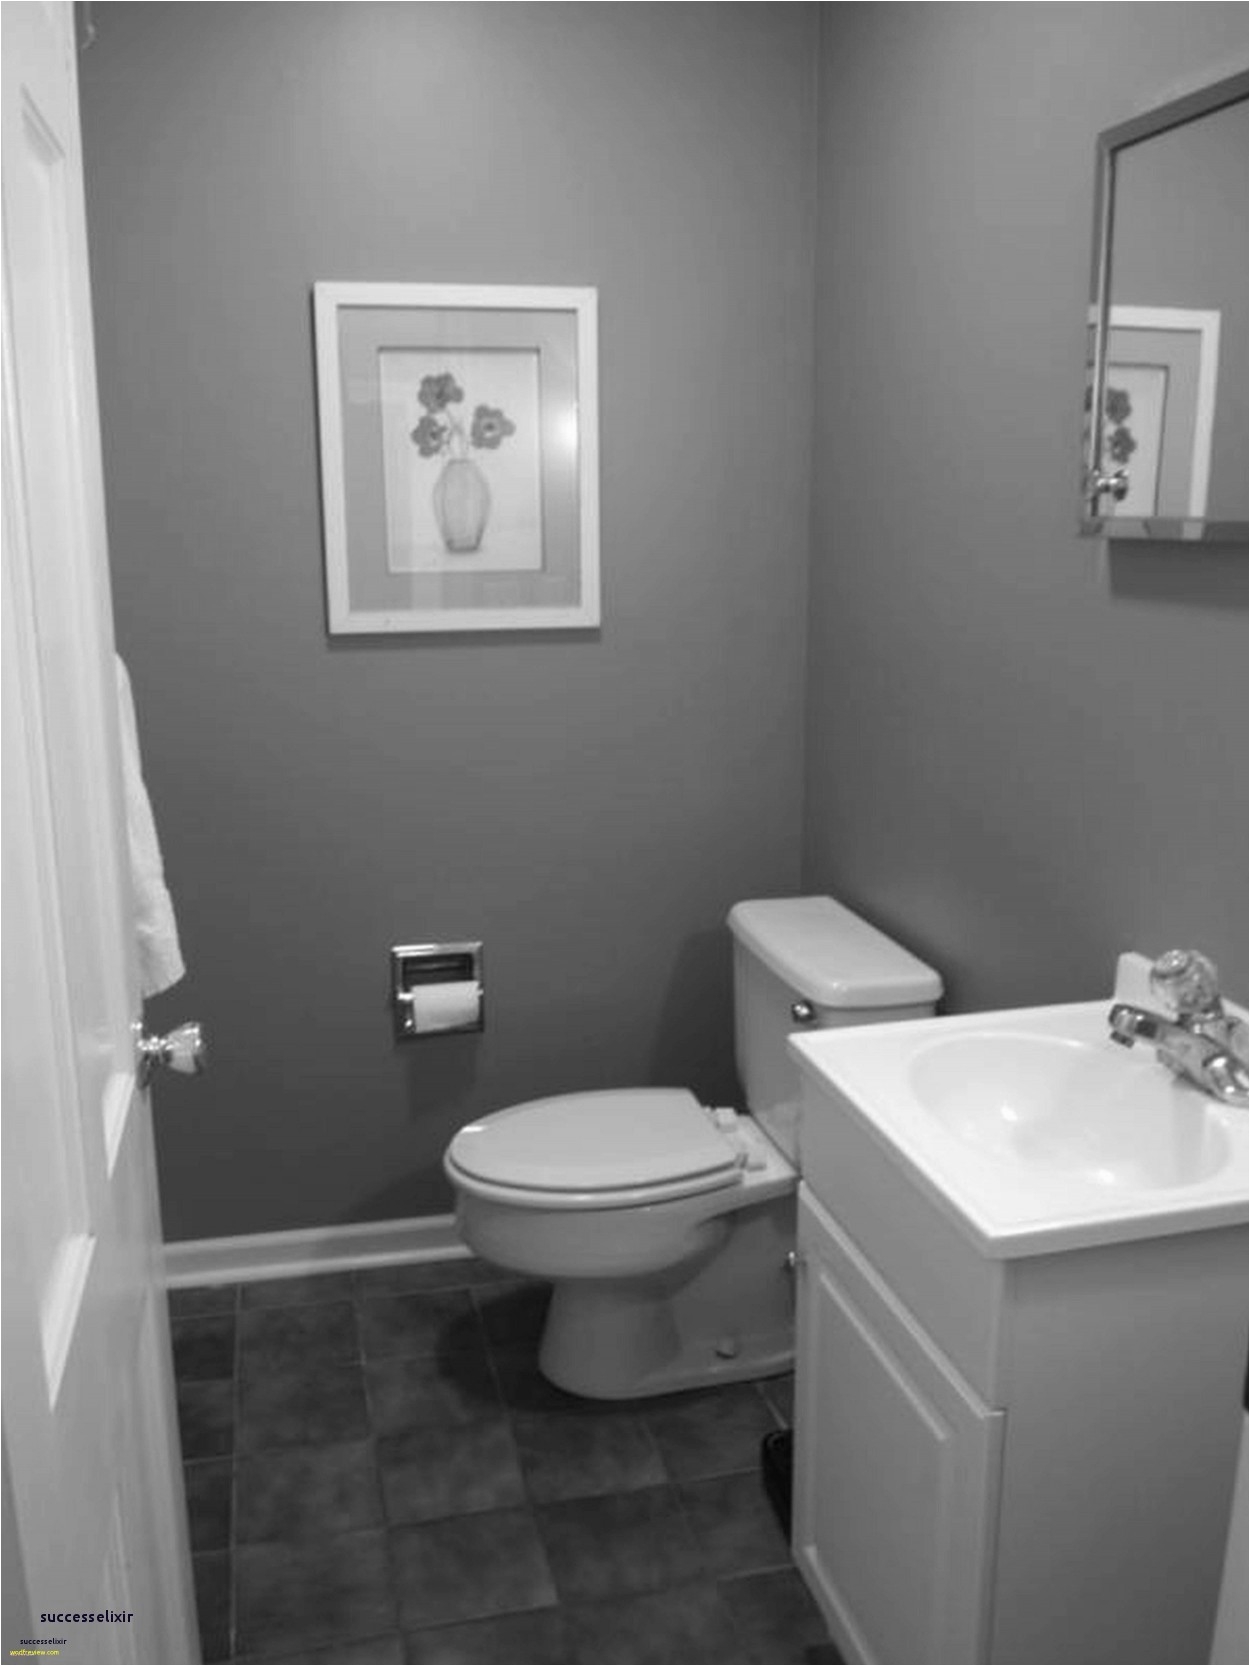 Bathroom and toilet Designs for Small Spaces Awesome 38 Amazing Modern Small Bathroom Picture